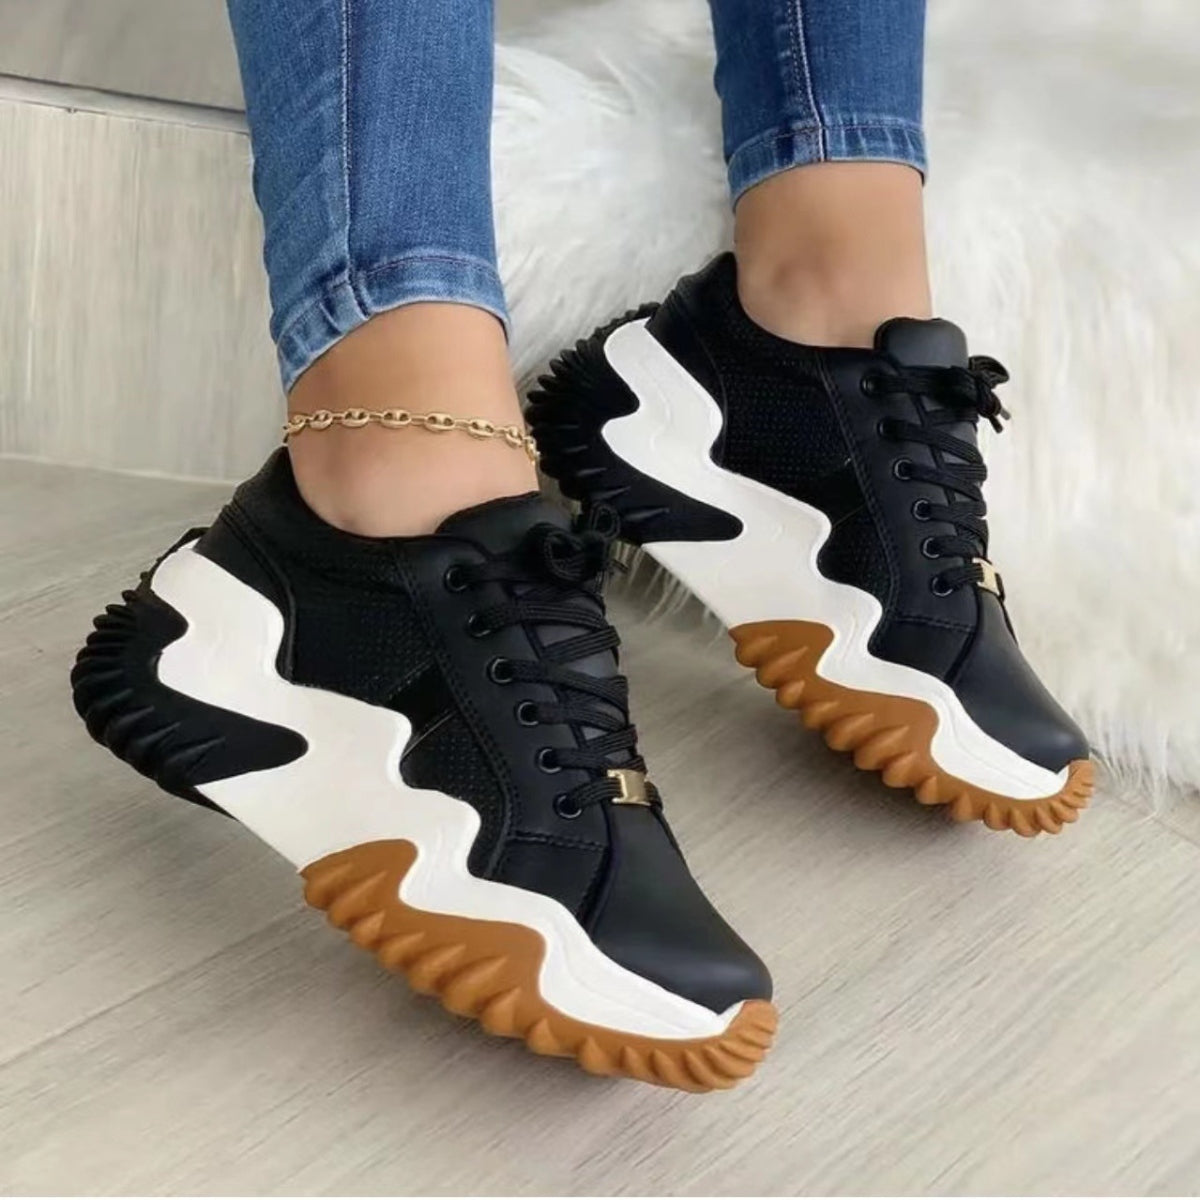 Gray Lace-Up PU Leather Platform Sneakers Sentient Beauty Fashions Shoes